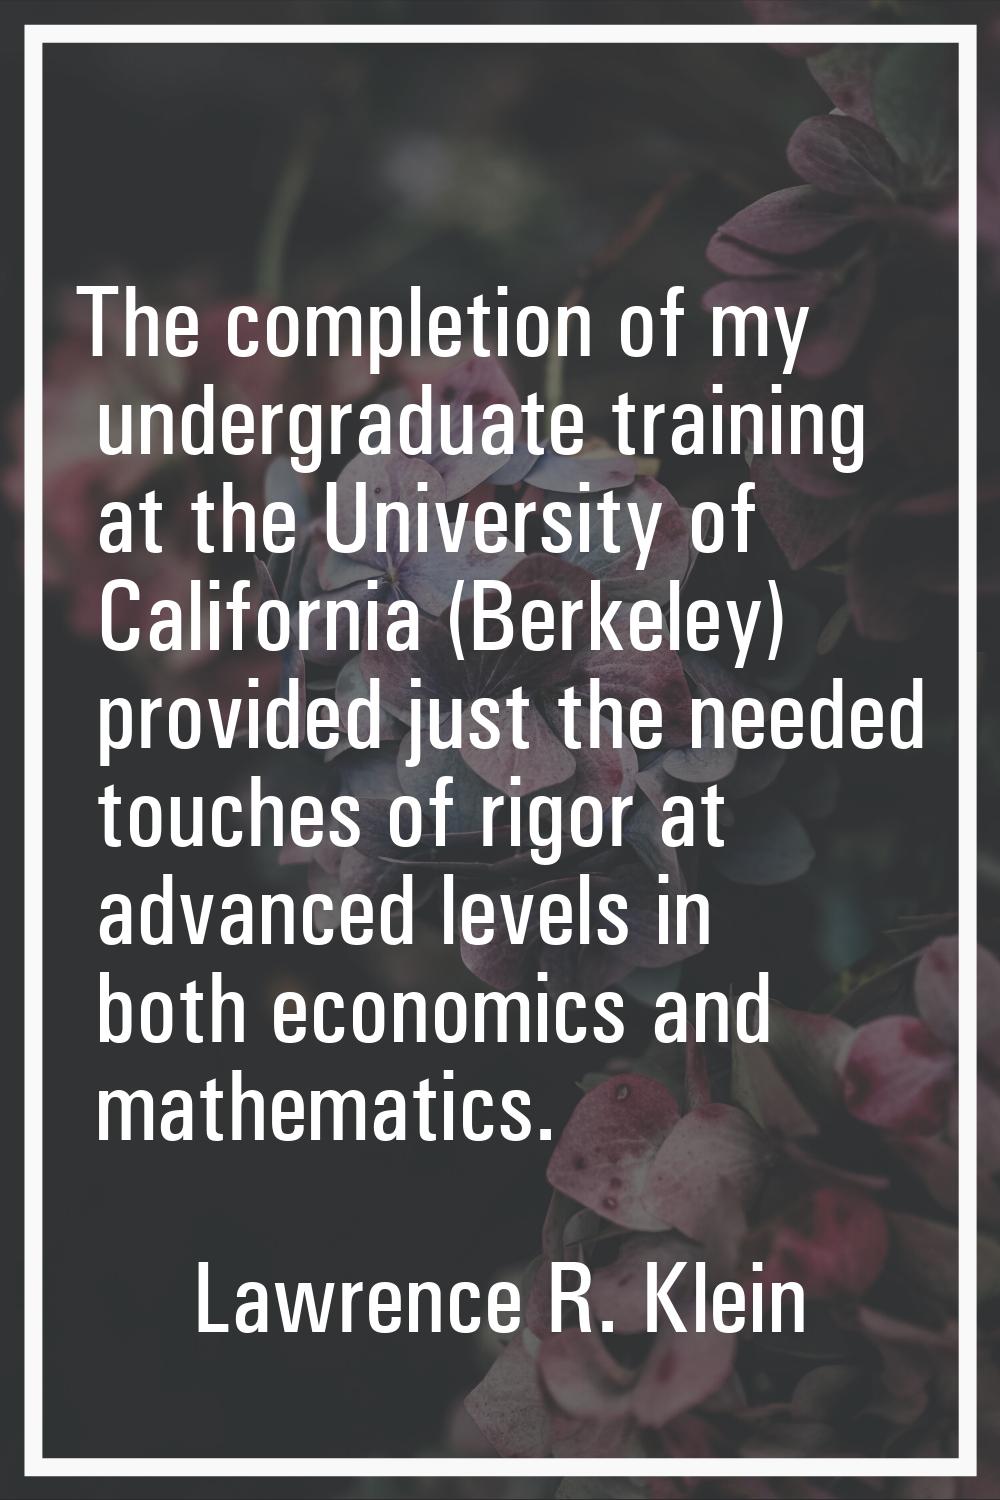 The completion of my undergraduate training at the University of California (Berkeley) provided jus